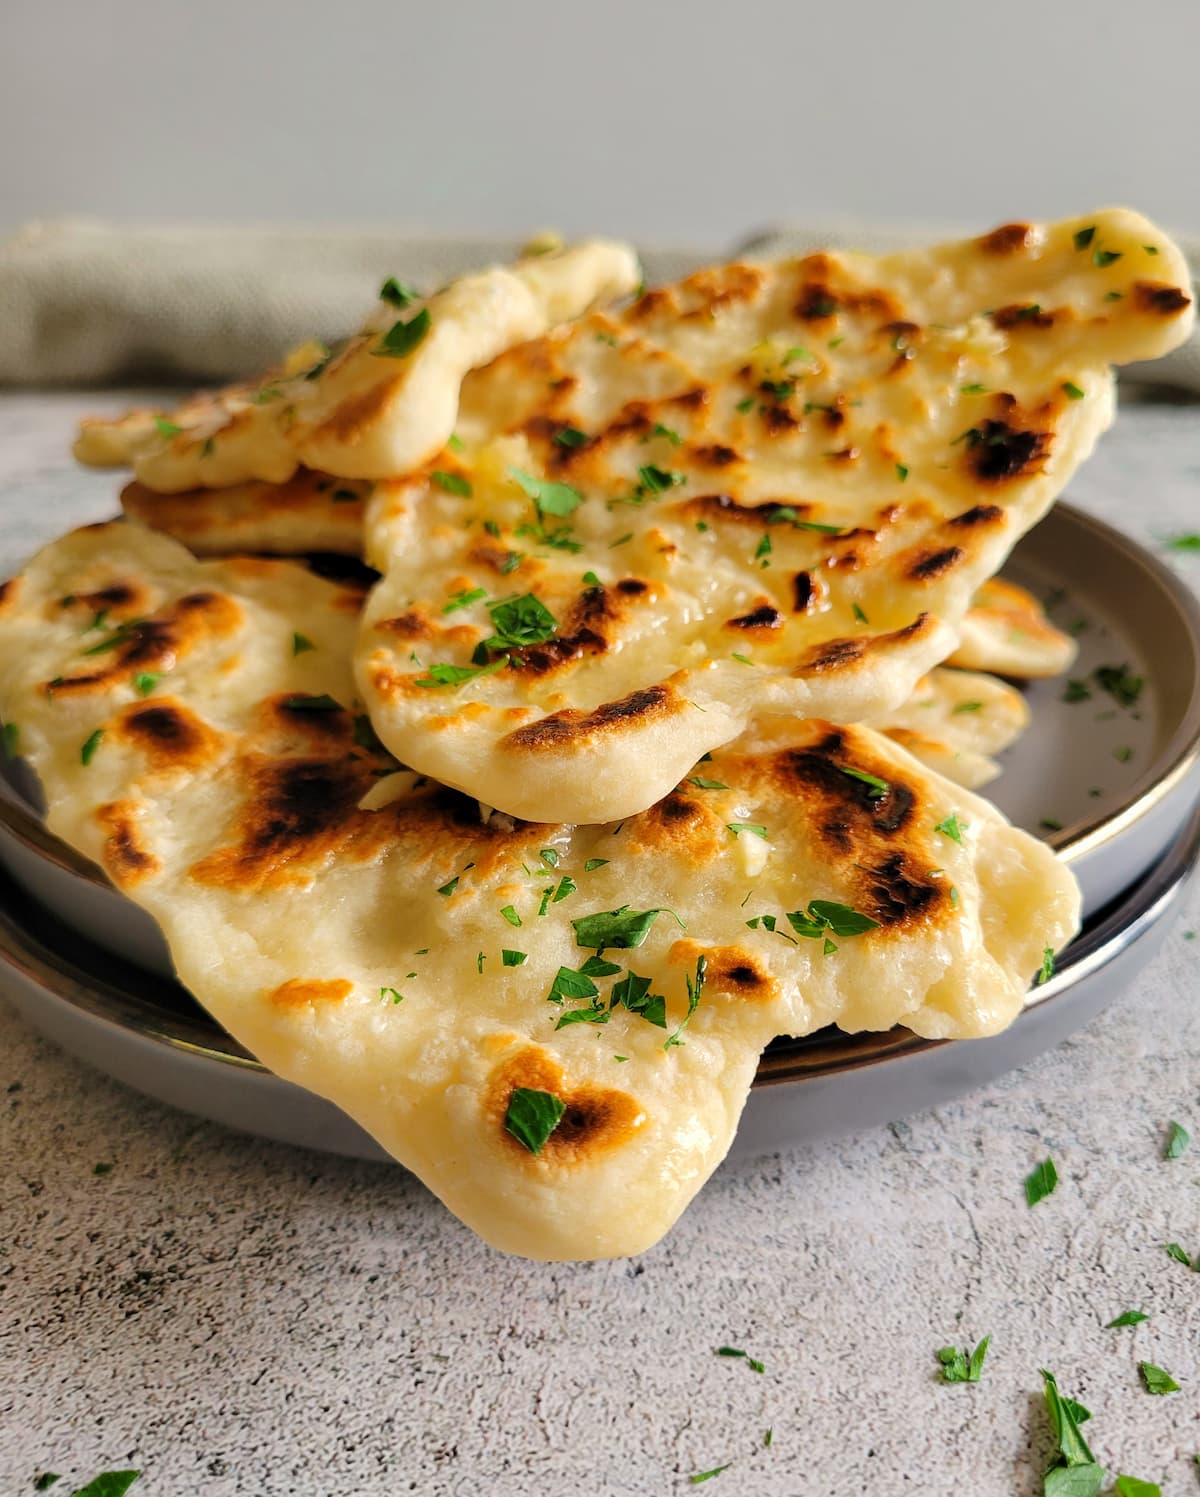 garlic naan bread piled on double plates